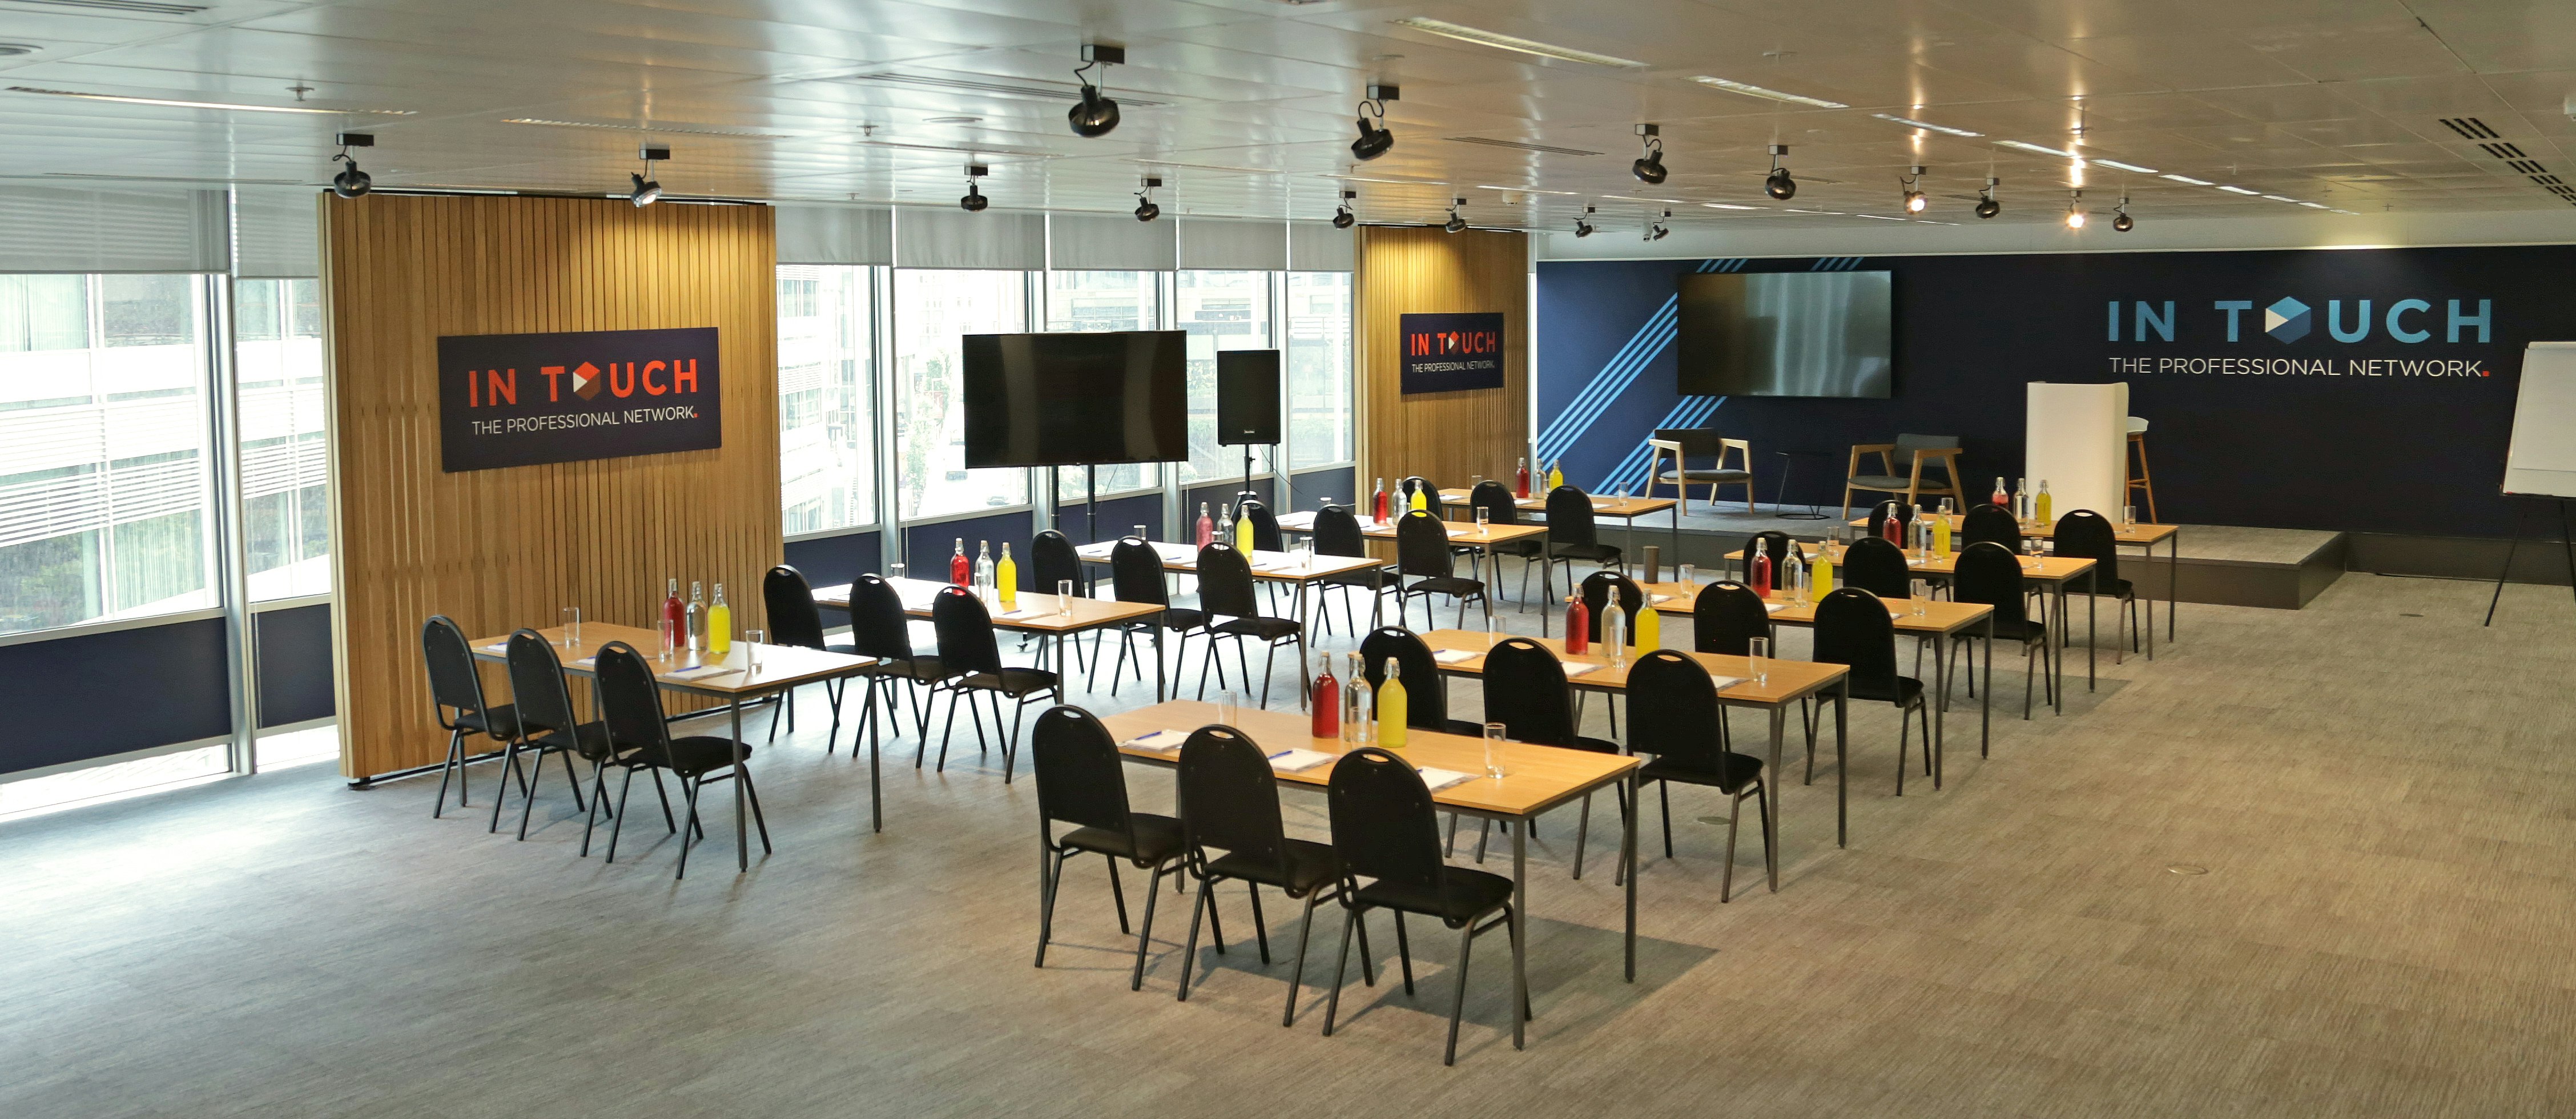 Manchester International Conference Centre - Spinningfields Suite image 6